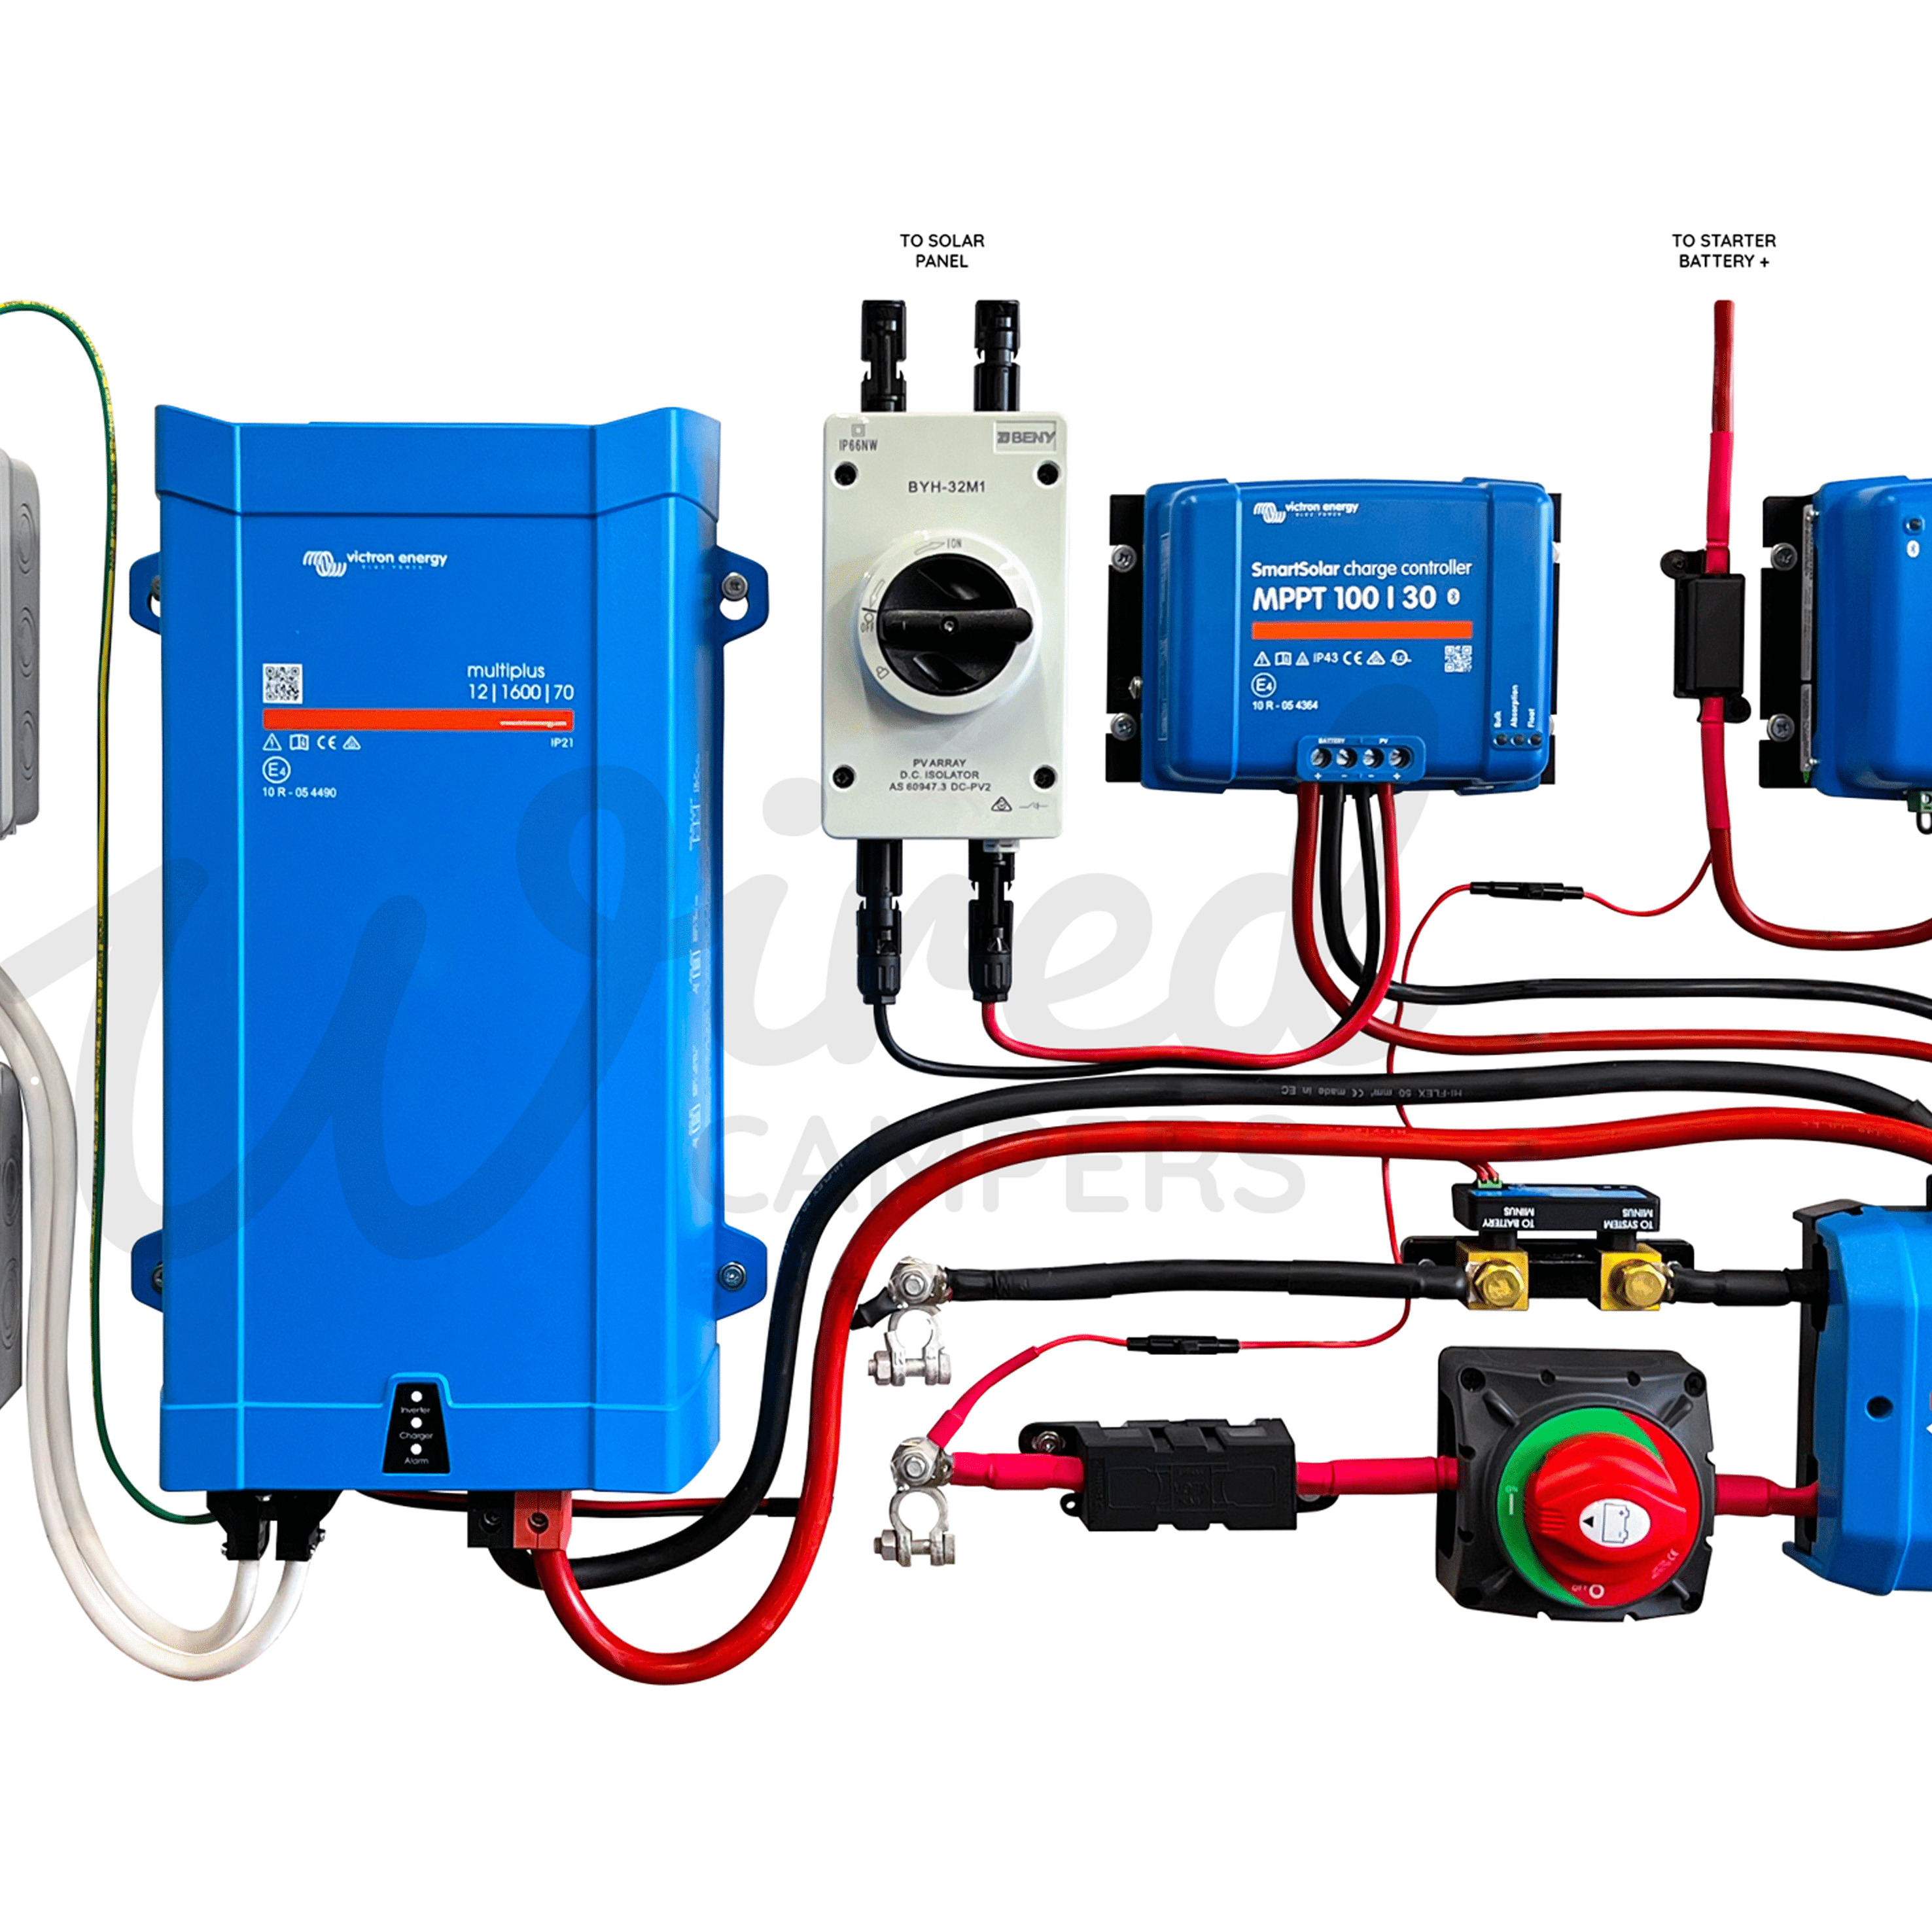 Wired Campers Limited Victron Energy Mains 230V Off Grid Kit With Mains Hook Up - Multiplus 12/1600/70